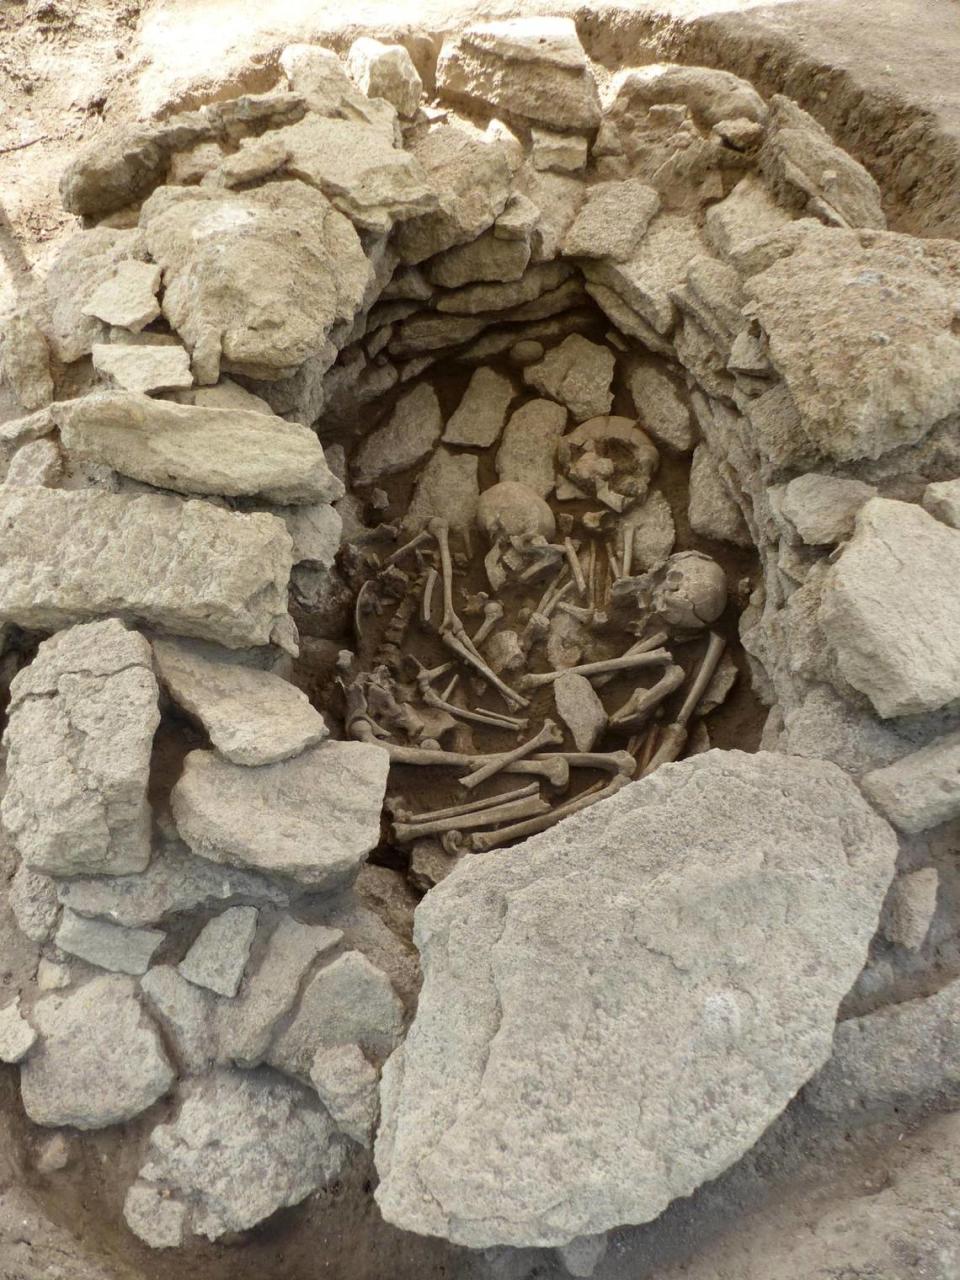 The remains of three people were found inside the stone burial, experts said.